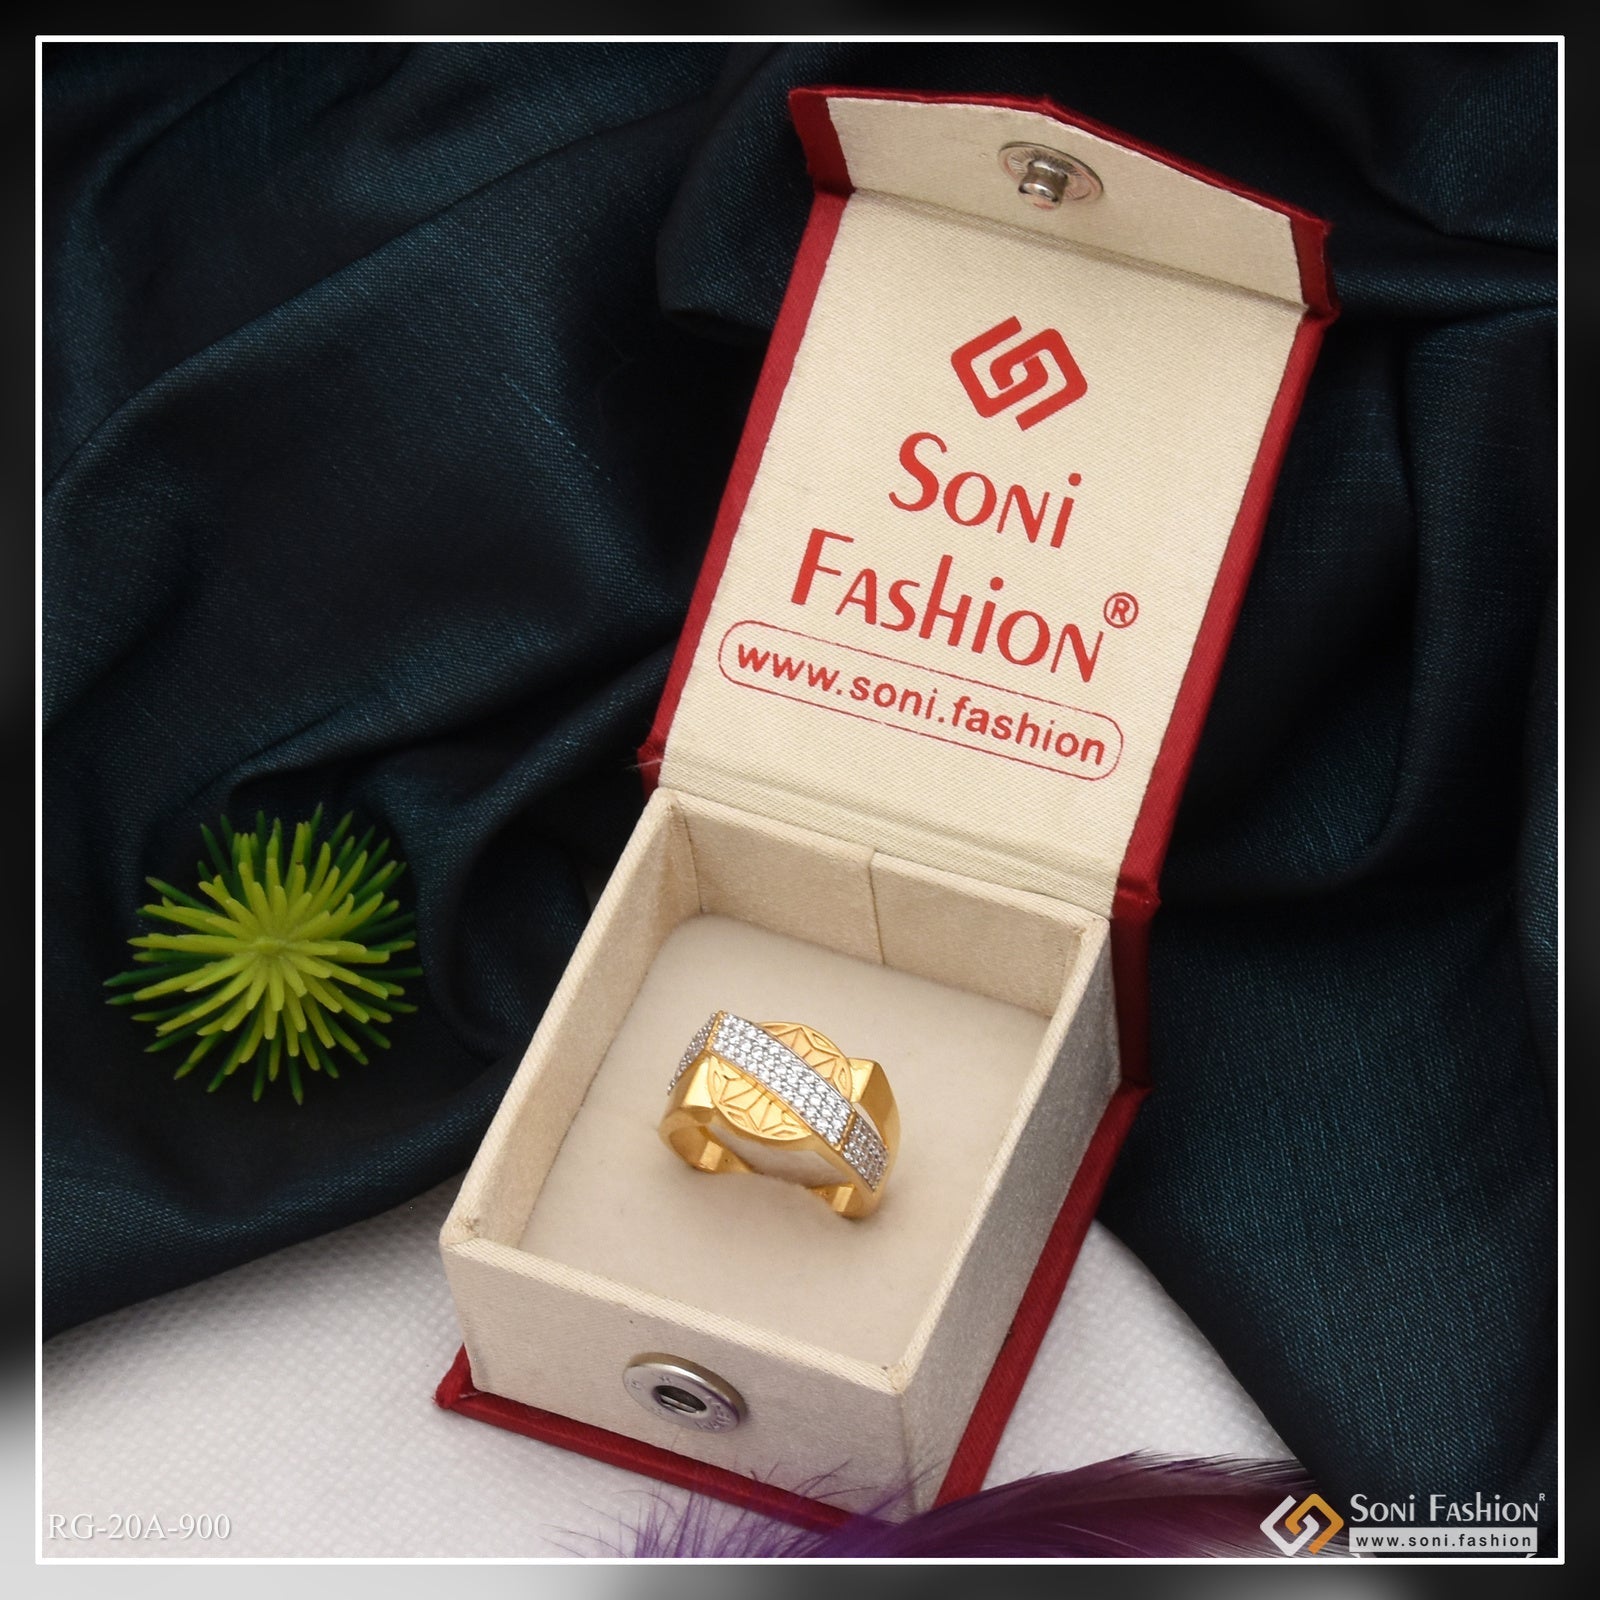 1 Gram Gold Forming Attention-Getting Design with Diamond Ring for Men - Style A900